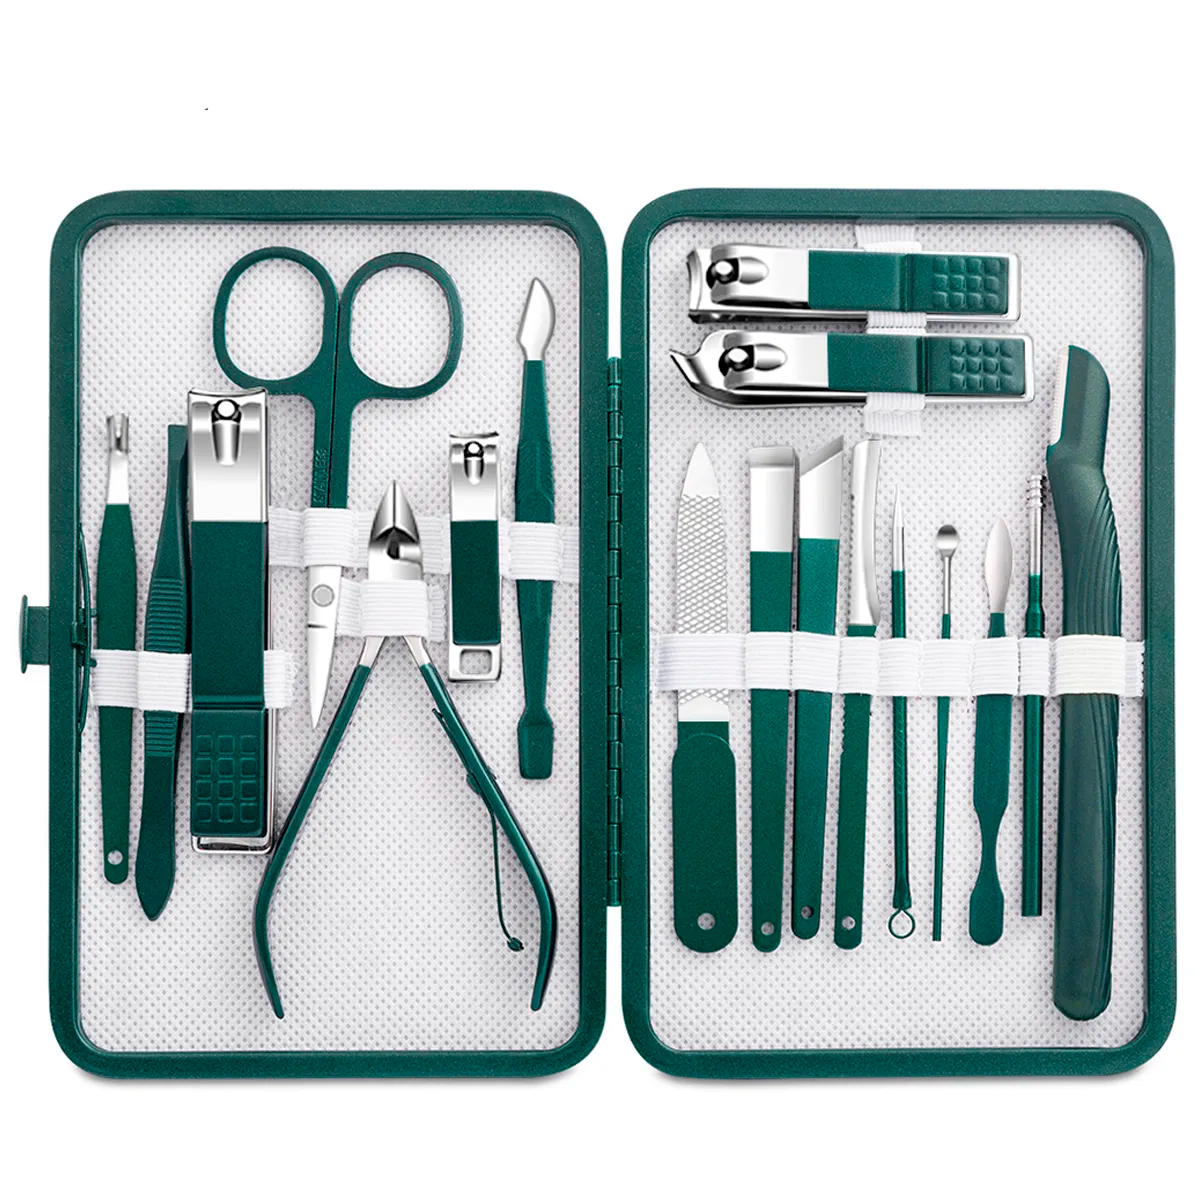 Portable stainless steel nail clipper set